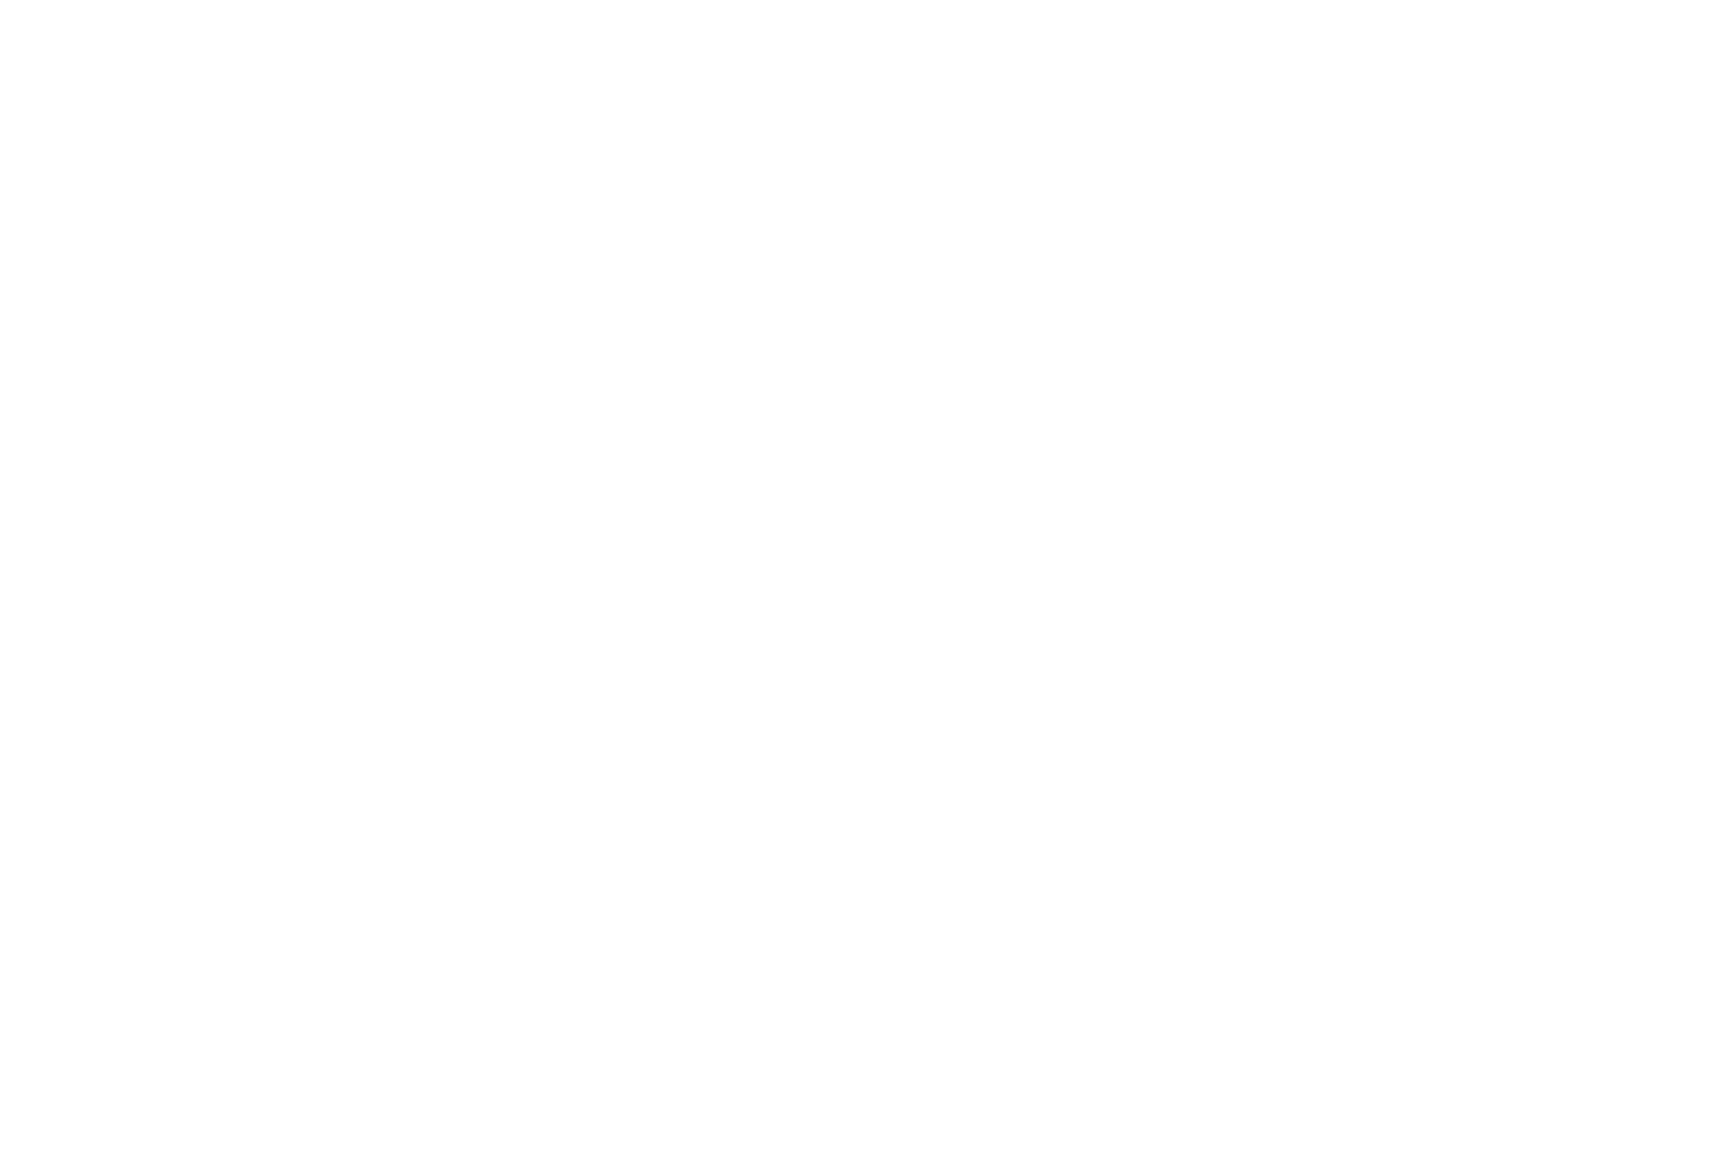 OFFICIAL SELECTION - Blow-Up International Arthouse Filmfest Chicago - 2020.png